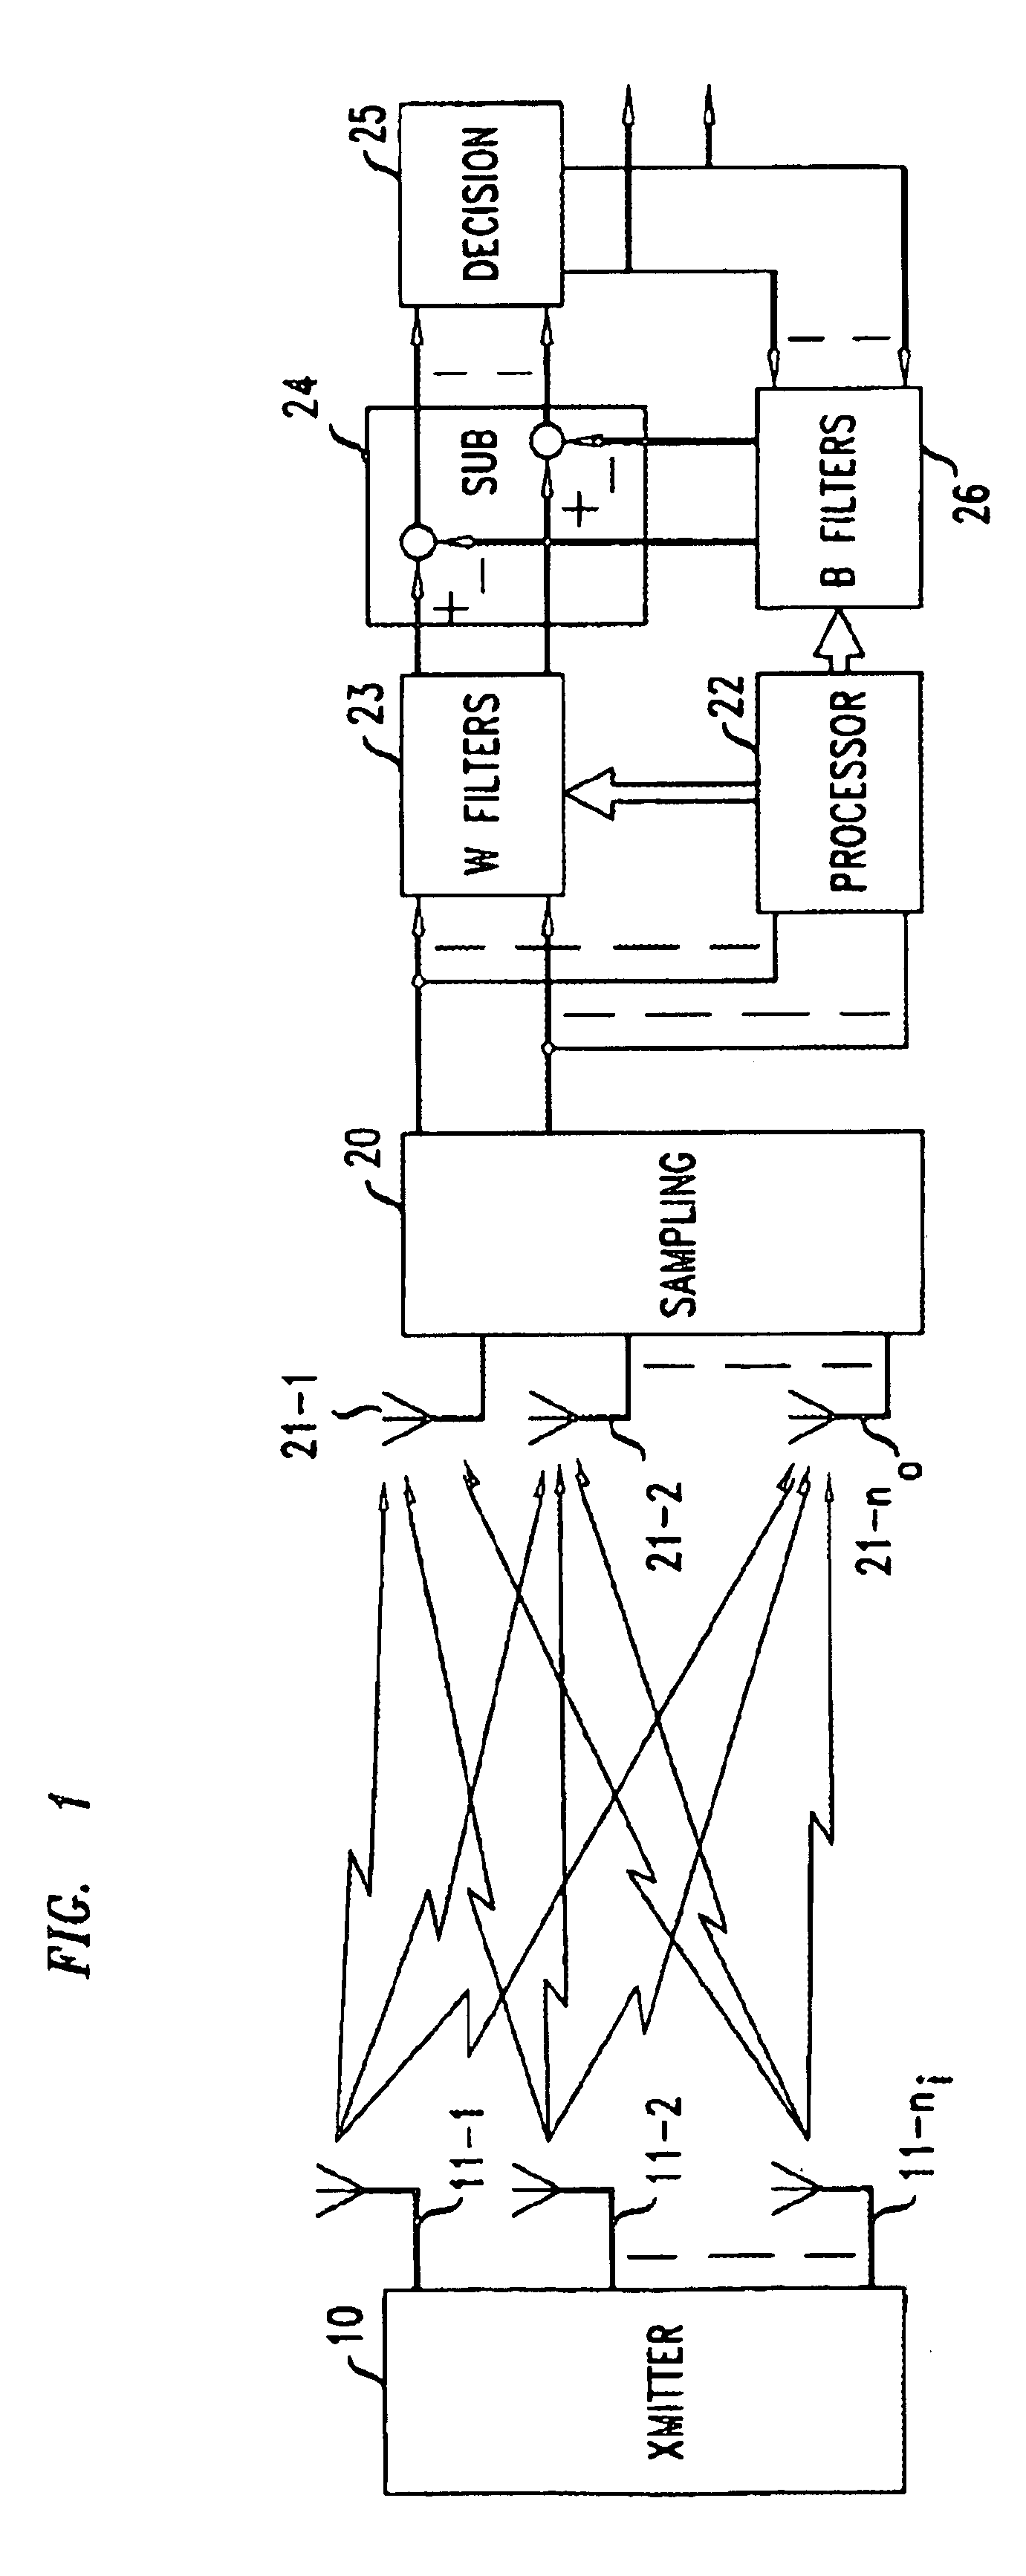 Finite-length equalization over multi-input multi-output channels